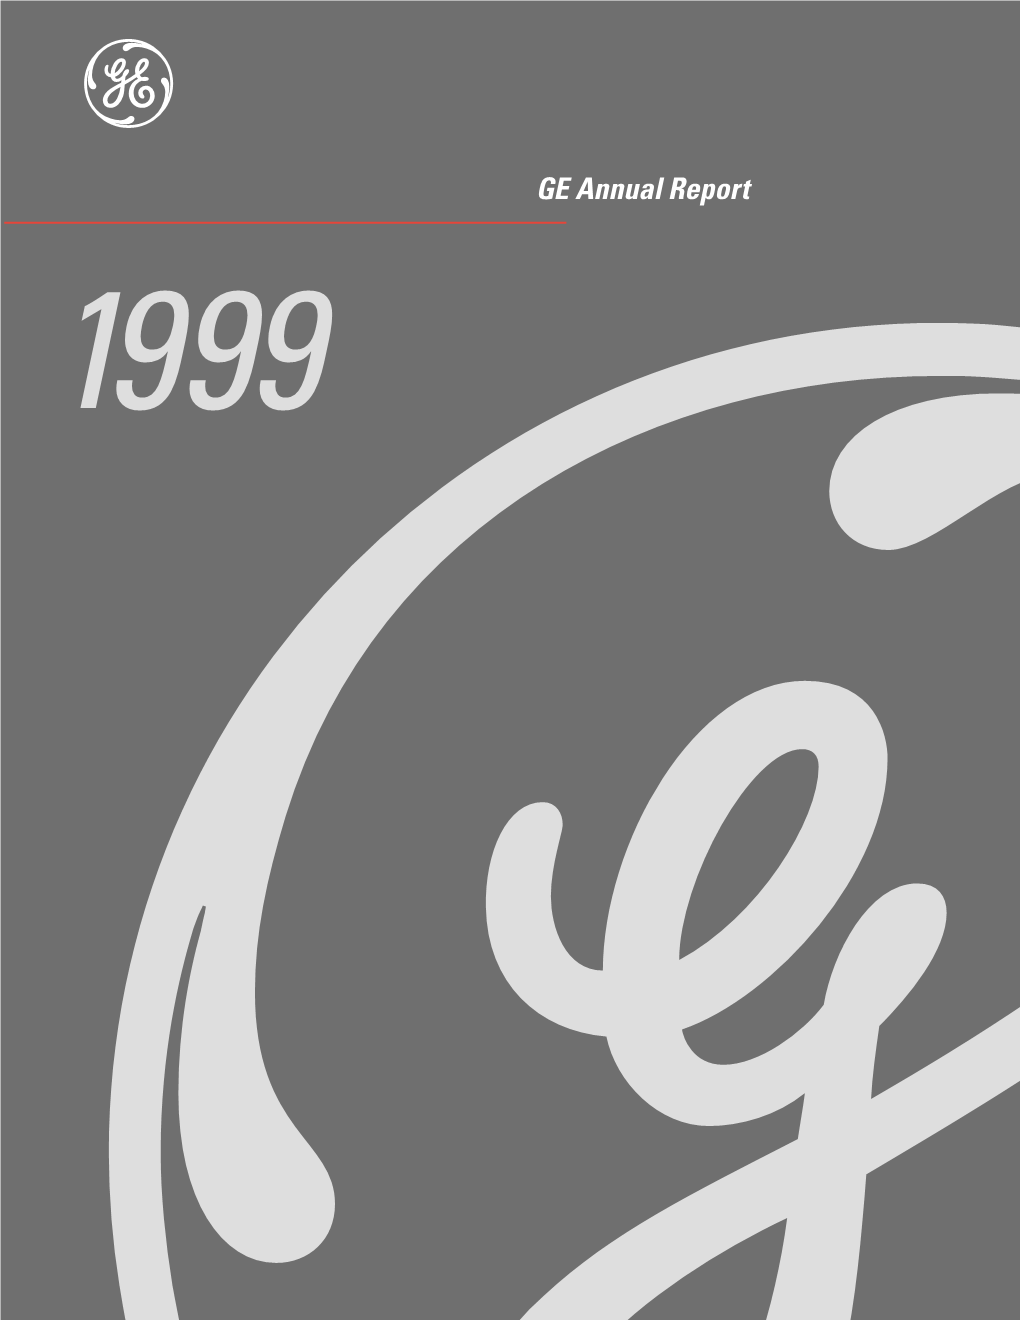 GE Annual Report 1999 Financial Highlights